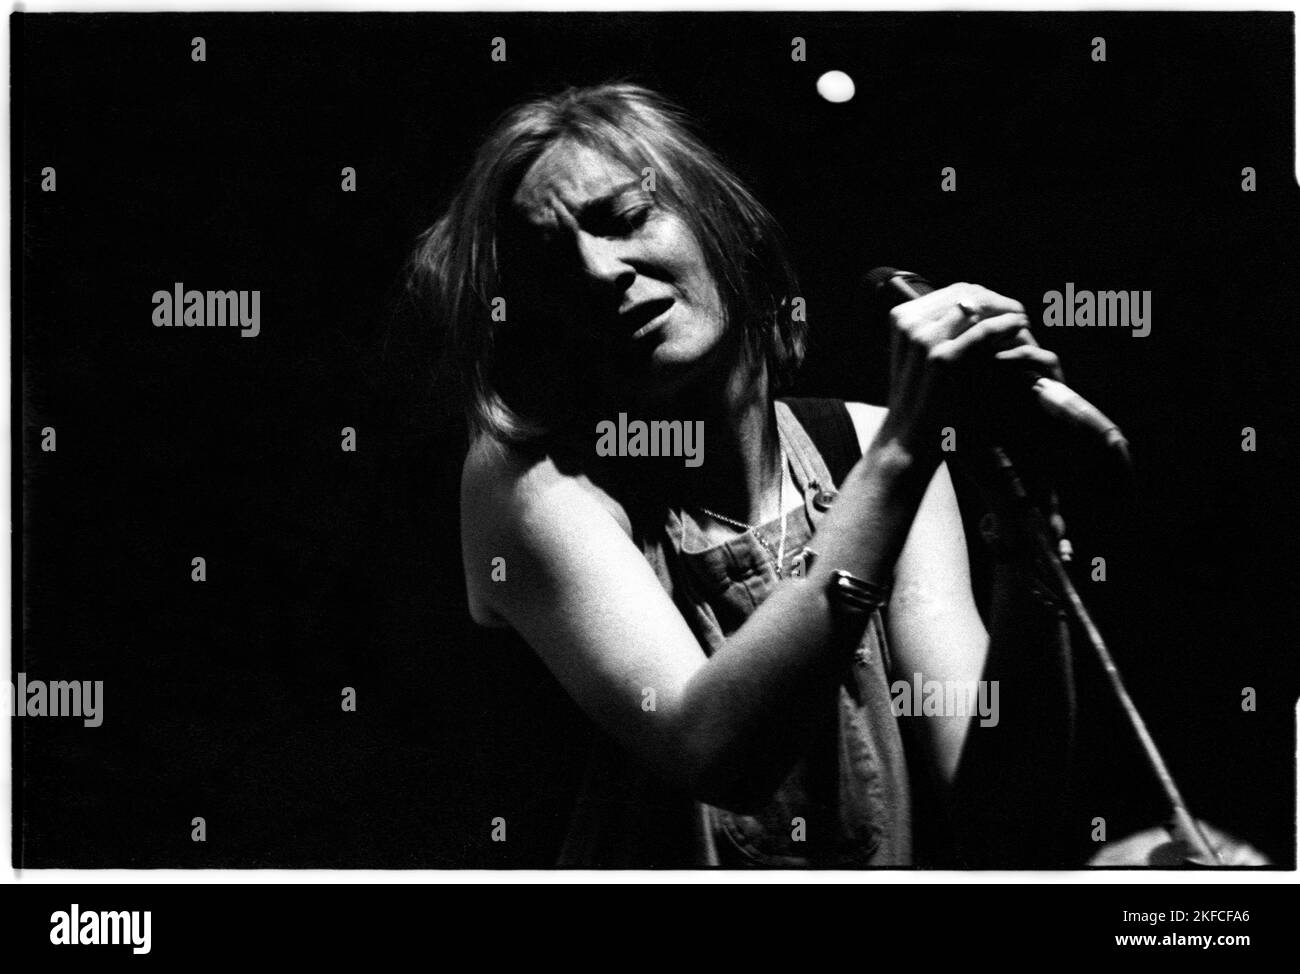 PORTISHEAD, GLASTONBURY FESTIVAL, 1995: Beth Gibbons of Portishead live on the Acoustic Stage at the Glastonbury Festival, England, June 24, 1995. This infamous performance went ahead in a massively overfull tent after a near riot that led to the previous act Evan Dando being bottled off stage. Photograph: Rob Watkins.   Portishead, a British trip-hop band formed in 1991, redefined electronic music with their dark, atmospheric sound. Albums like 'Dummy' and 'Portishead' showcased their haunting melodies and Beth Gibbons' emotive vocals, cementing their status as pioneers of the genre. Stock Photo